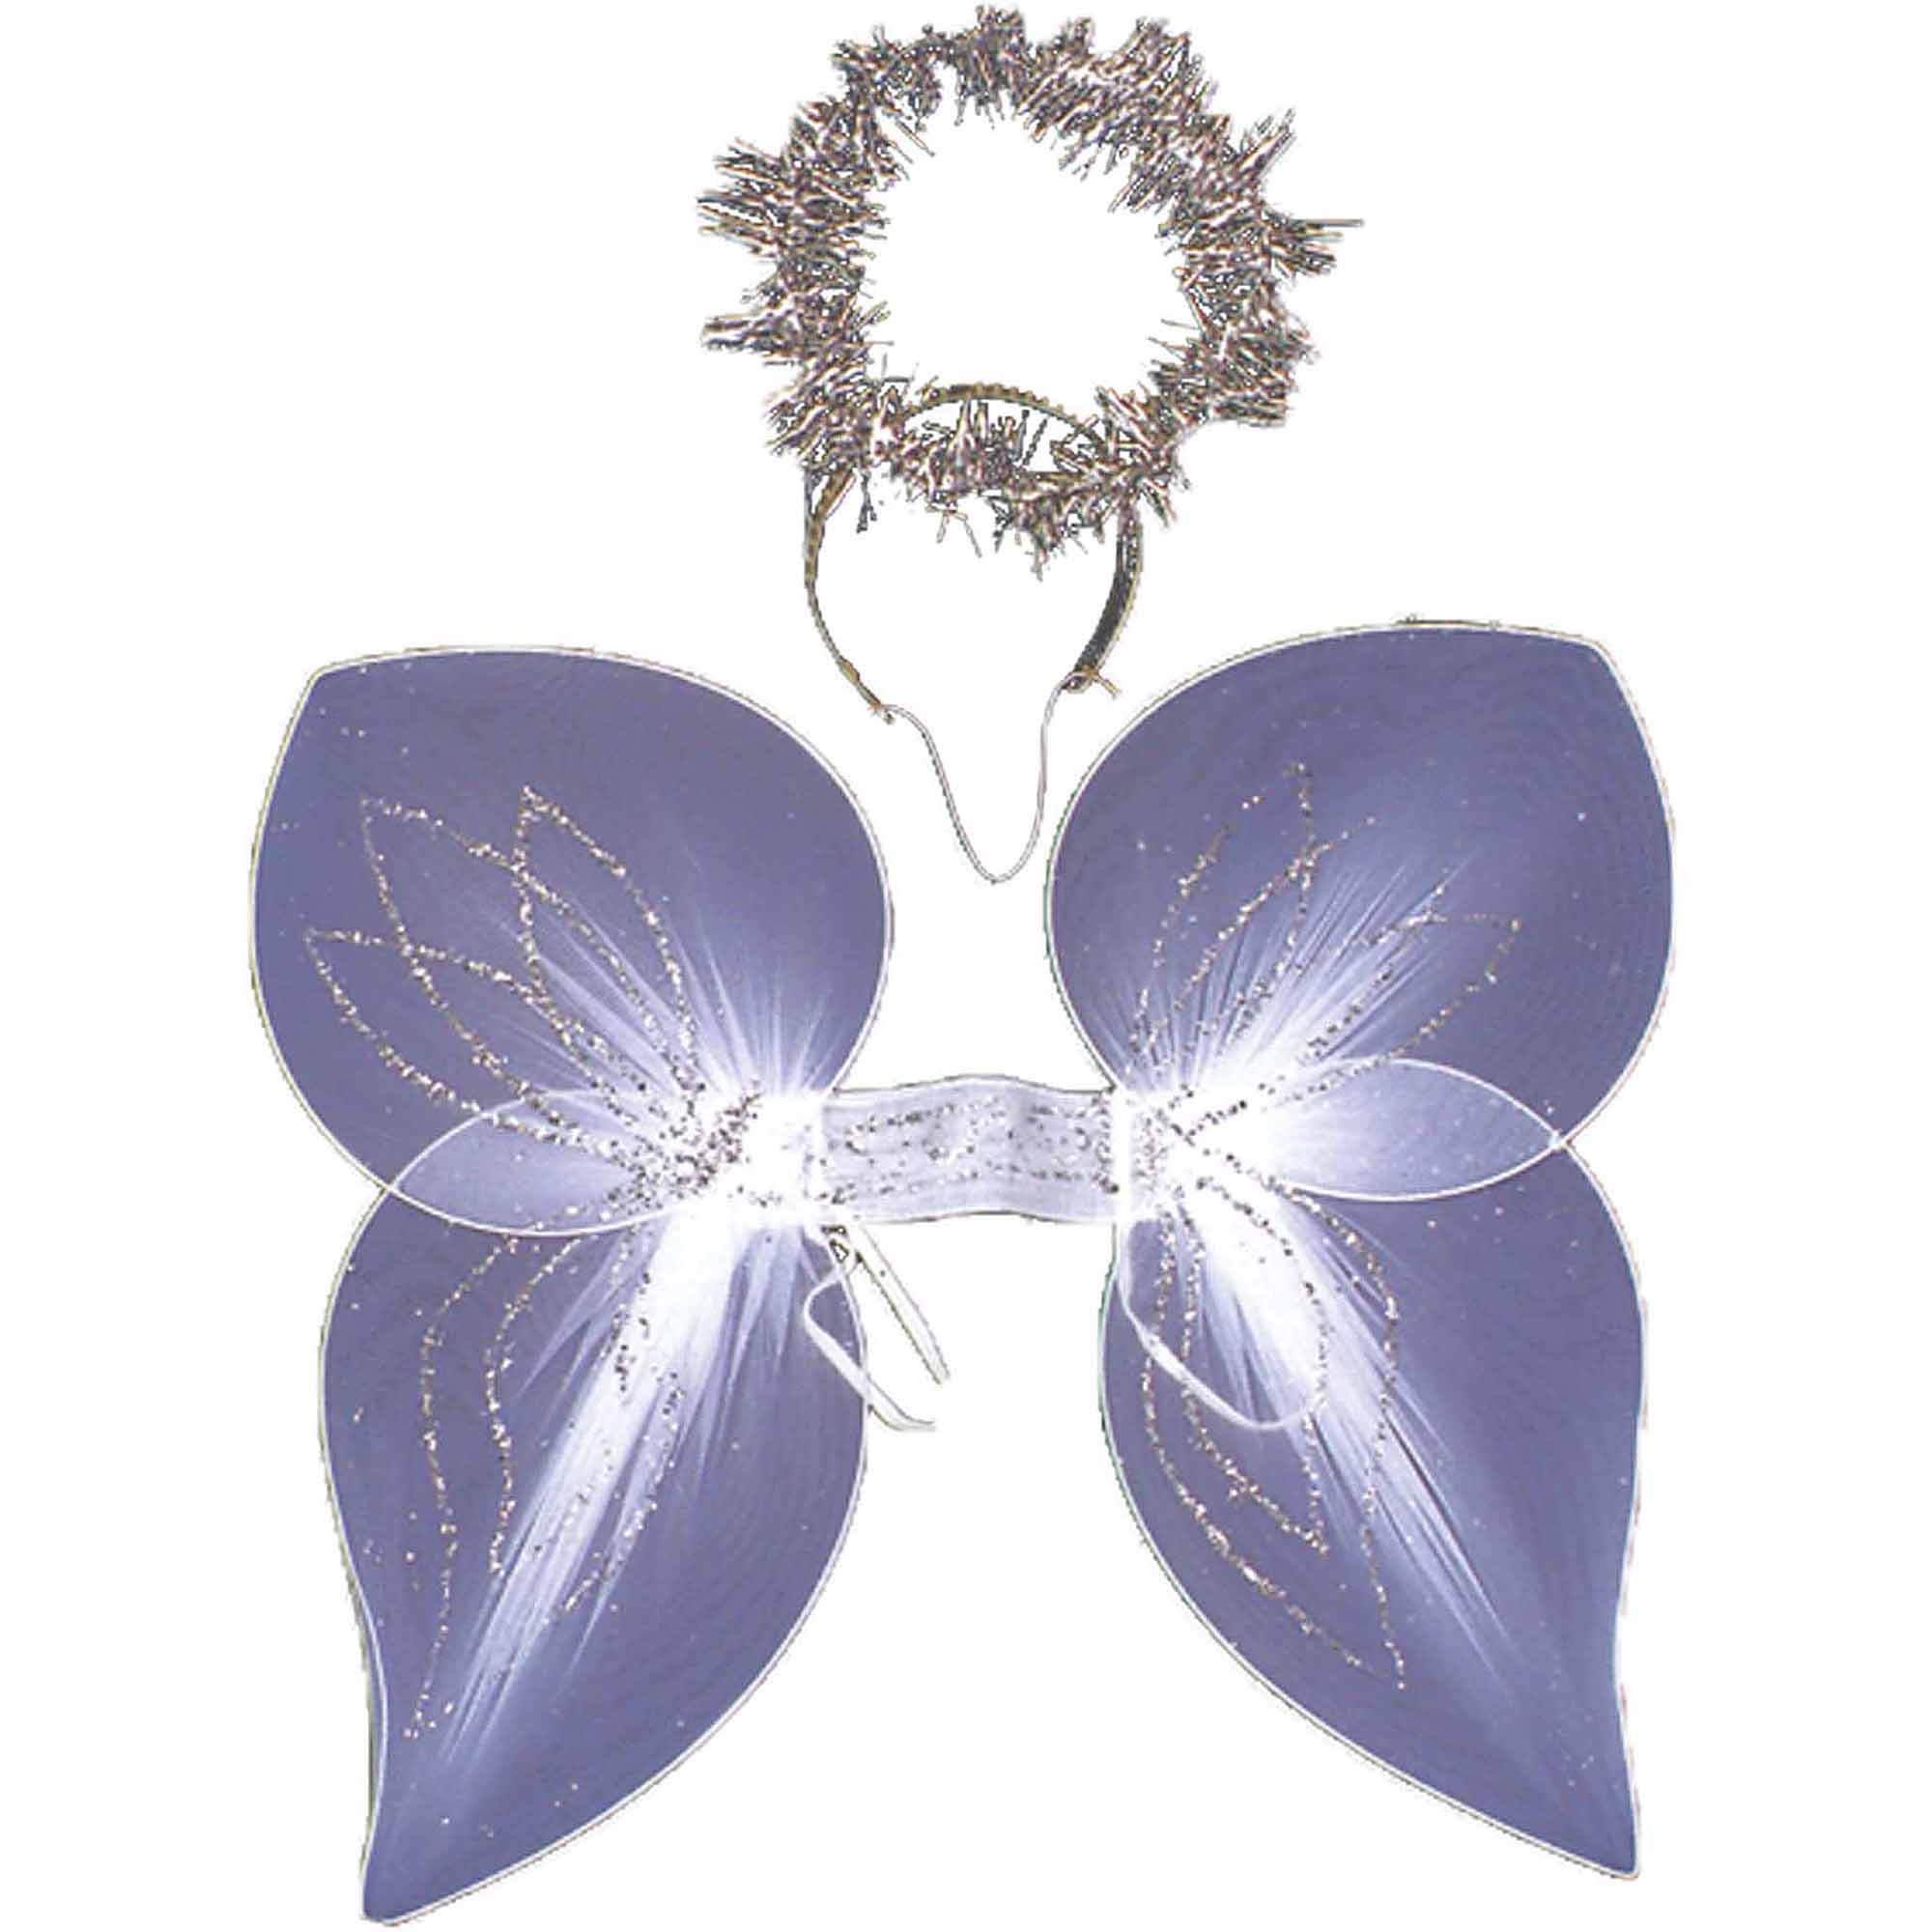 Angel Wings with Halo Set Adult Halloween Accessory - image 1 of 1